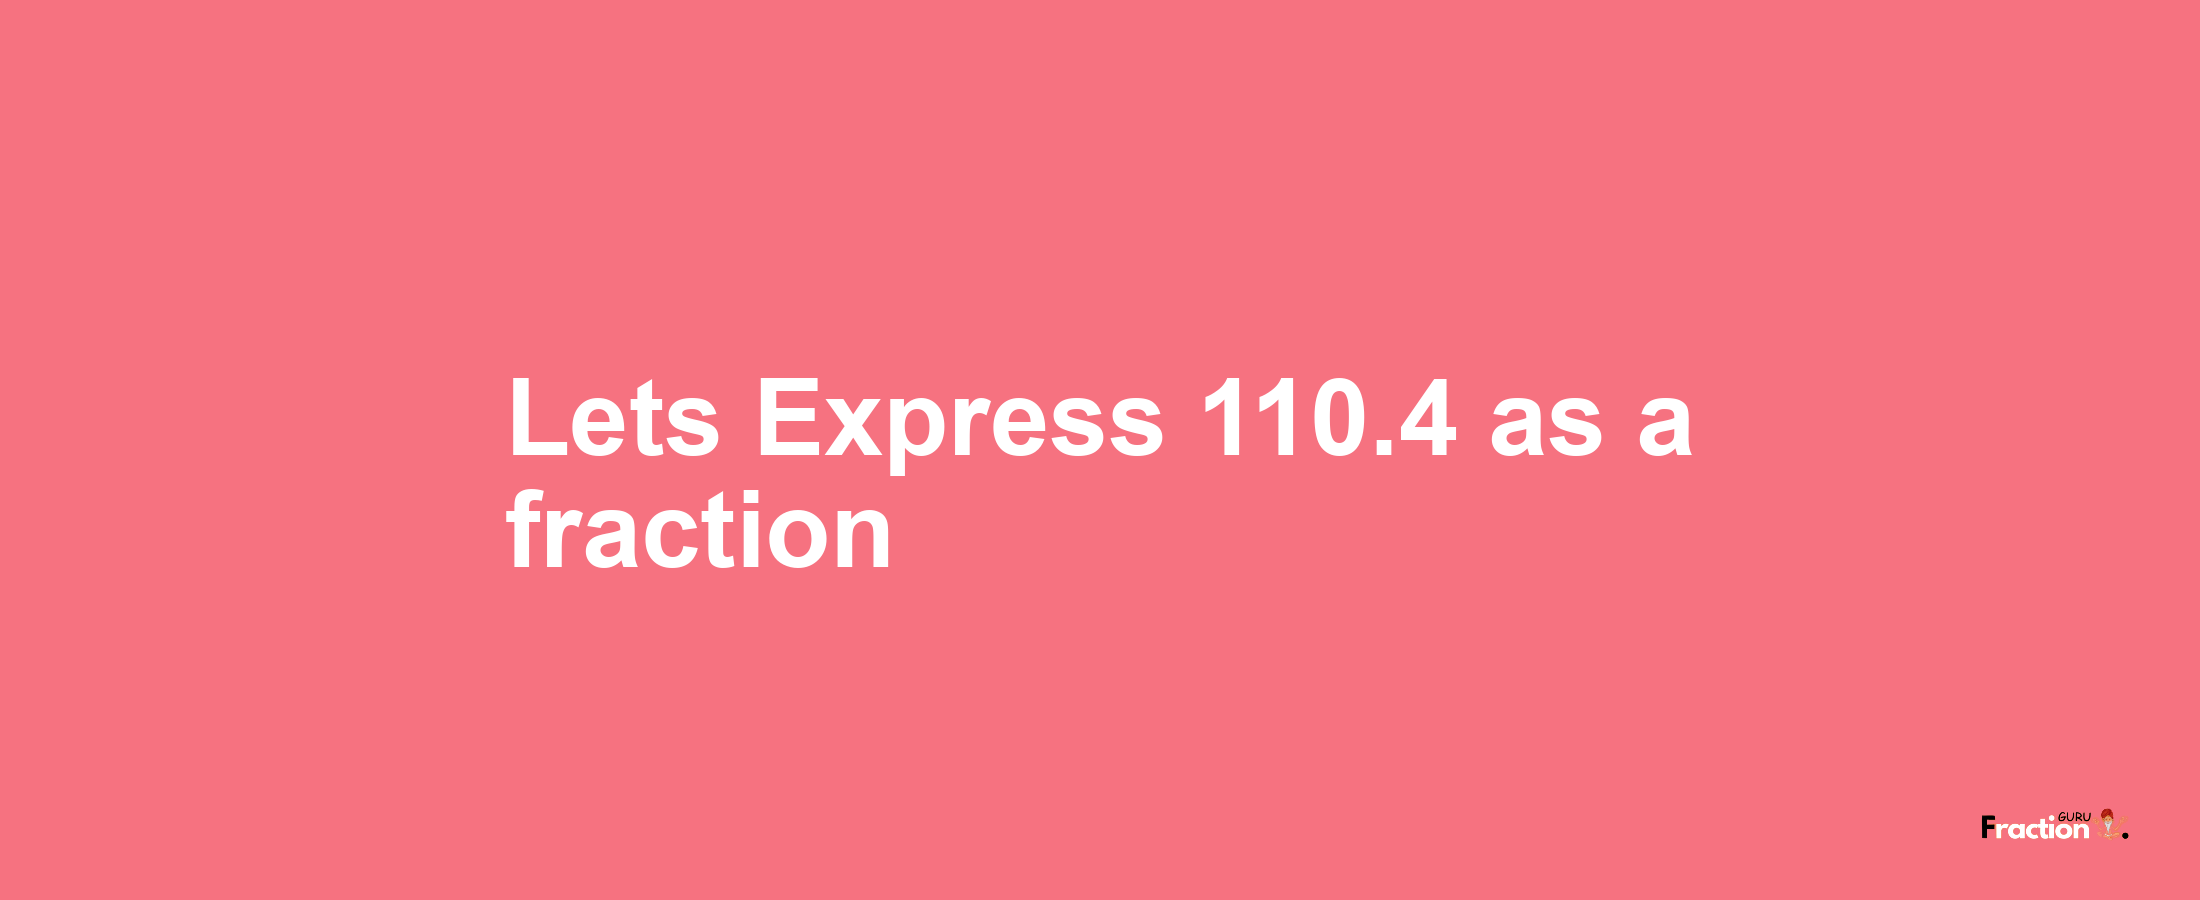 Lets Express 110.4 as afraction